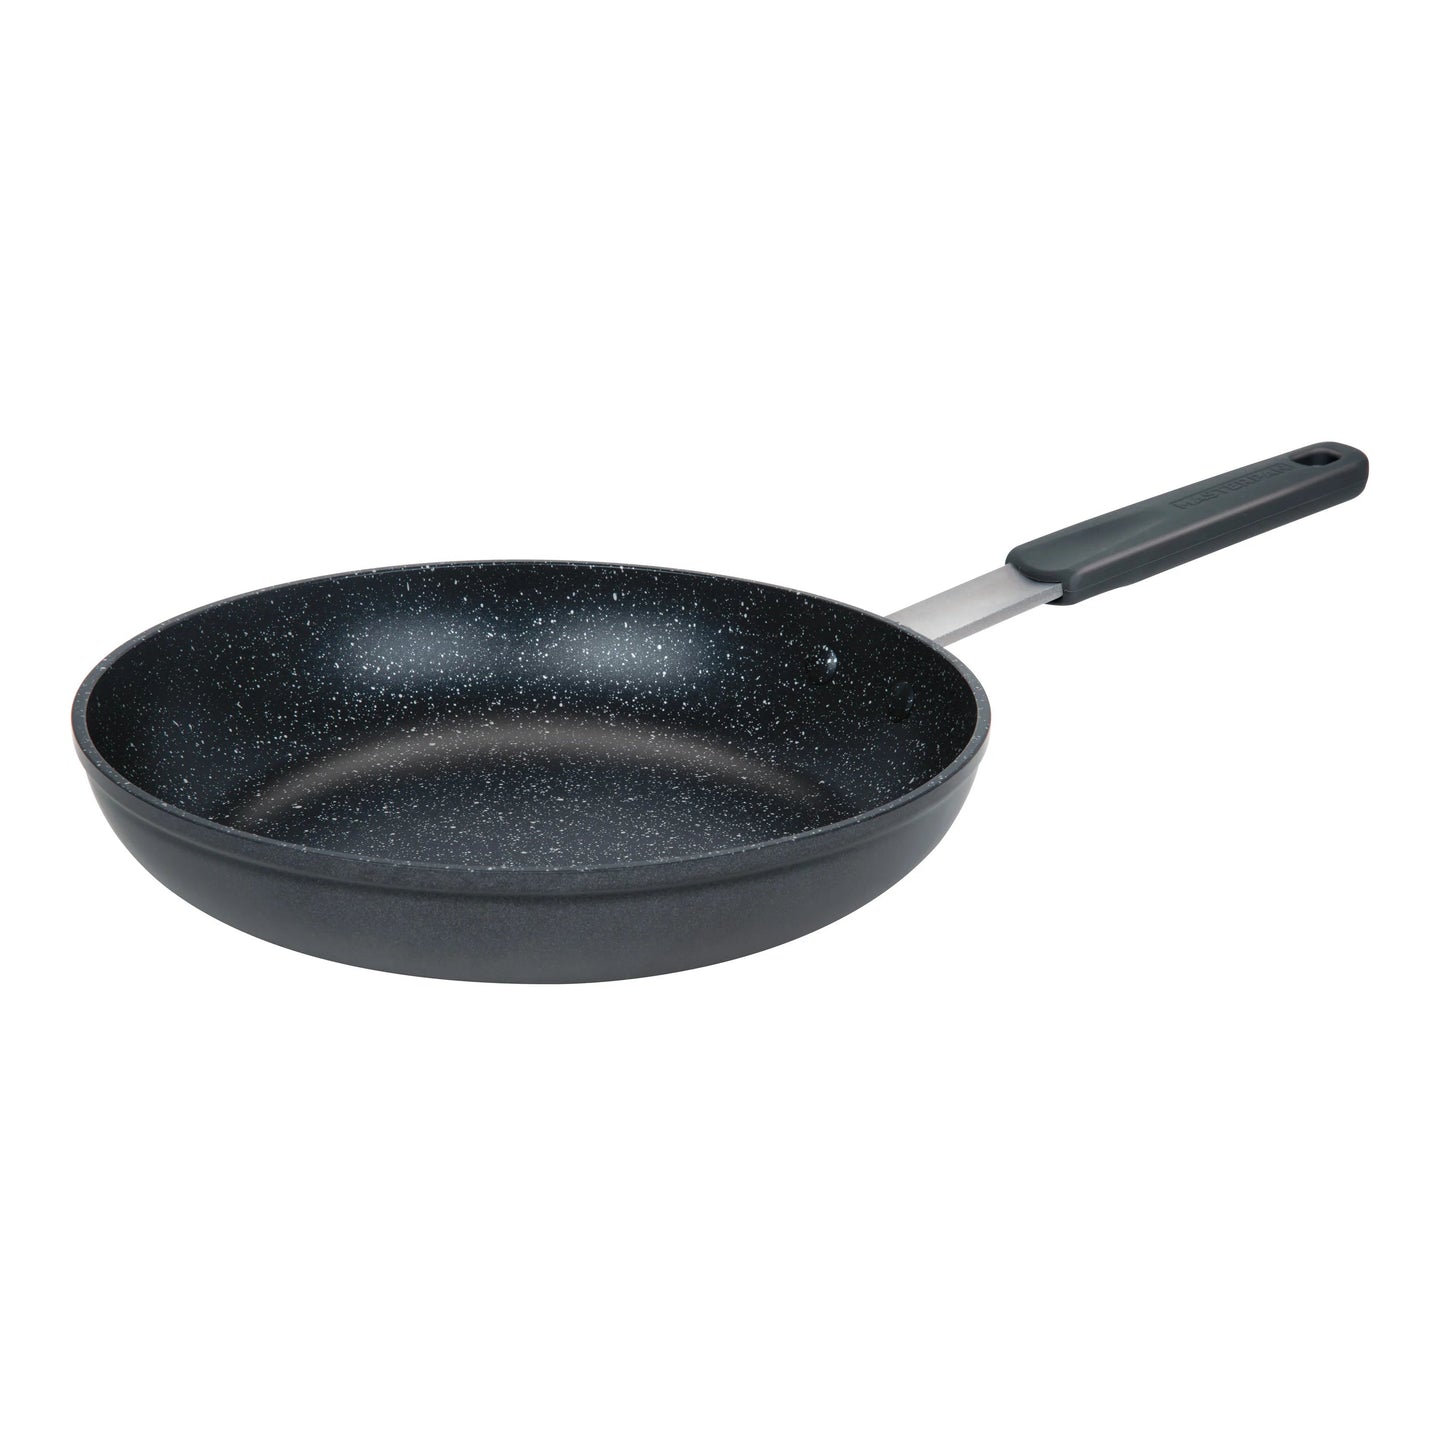 MASTERPAN Chef's Series 11" 4-Layer Ceramic Re-Enforced Non-Stick Cast Aluminum Frying Pan and Skillet With Riveted Stainless Steel Handle and Removable Silicone Handle Cover